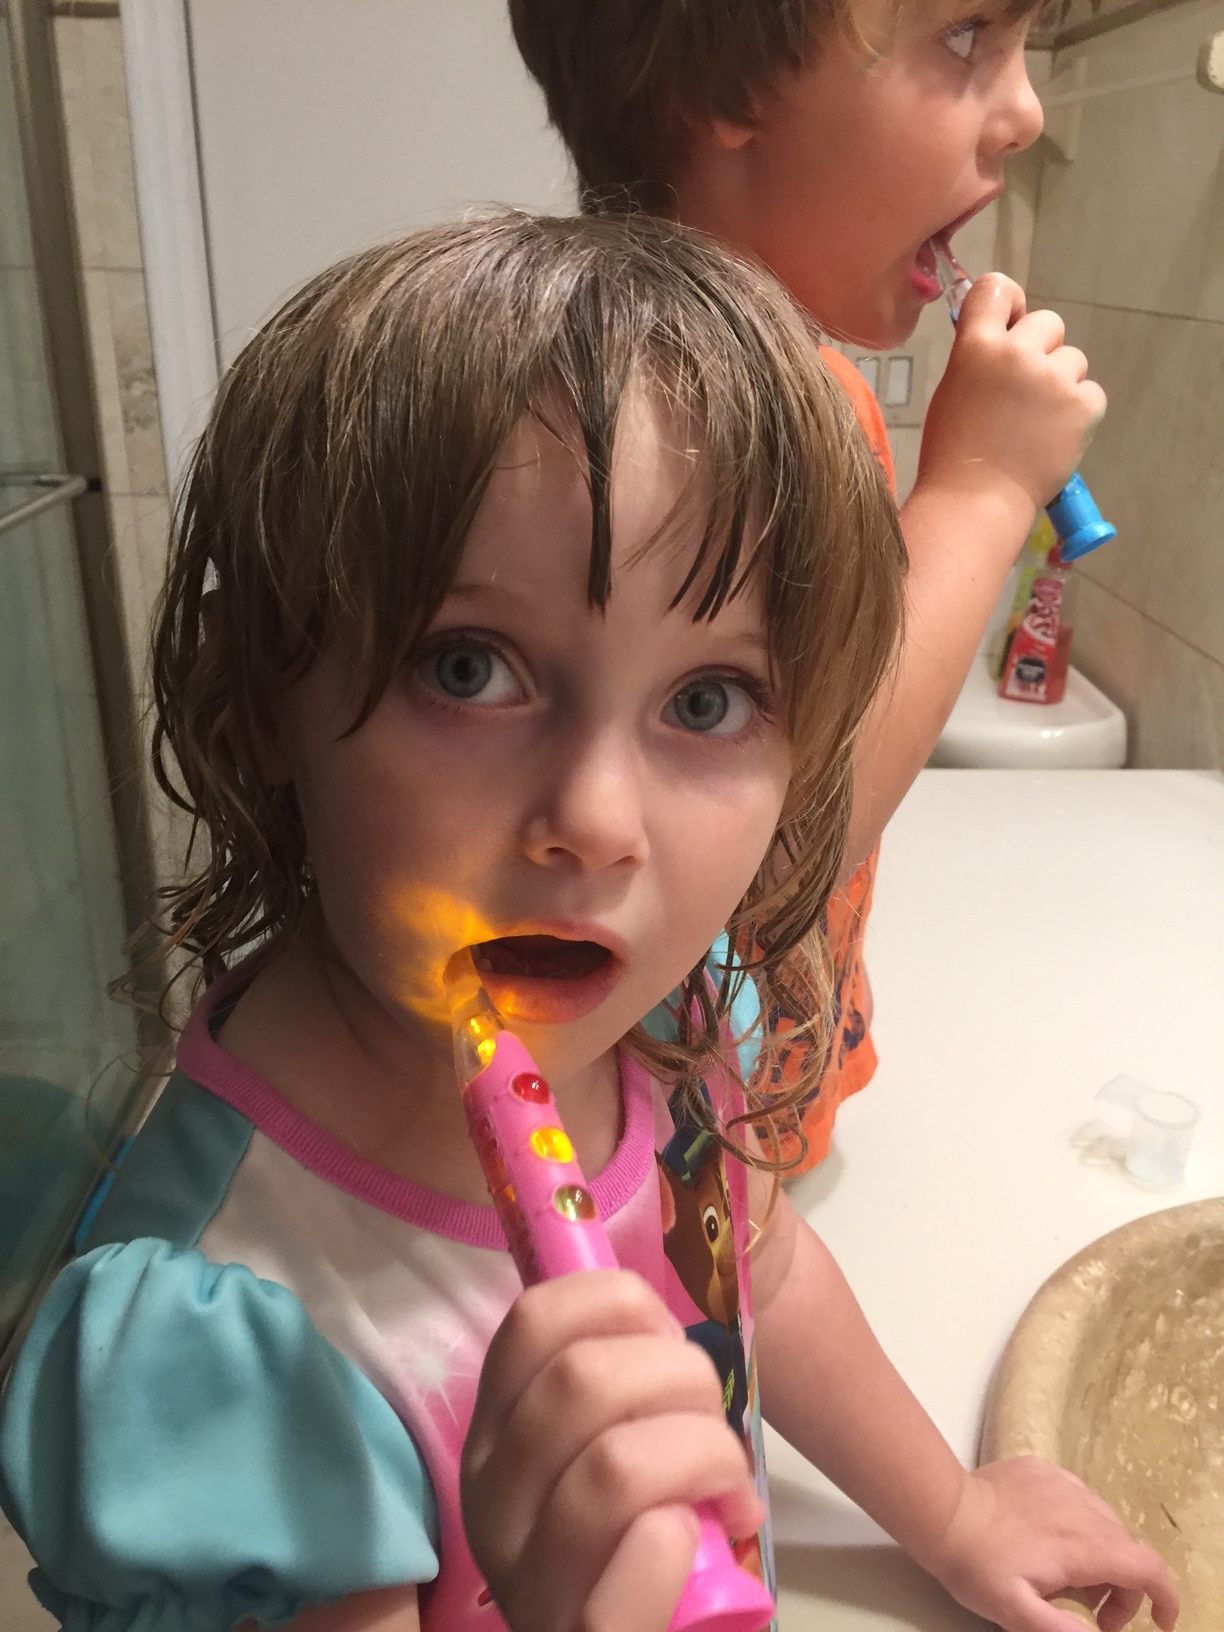 Teeth care for preschoolers | firefly toothbrush | acupful.com | mandy carter | travel tips with kids | bedtime routing while traveling